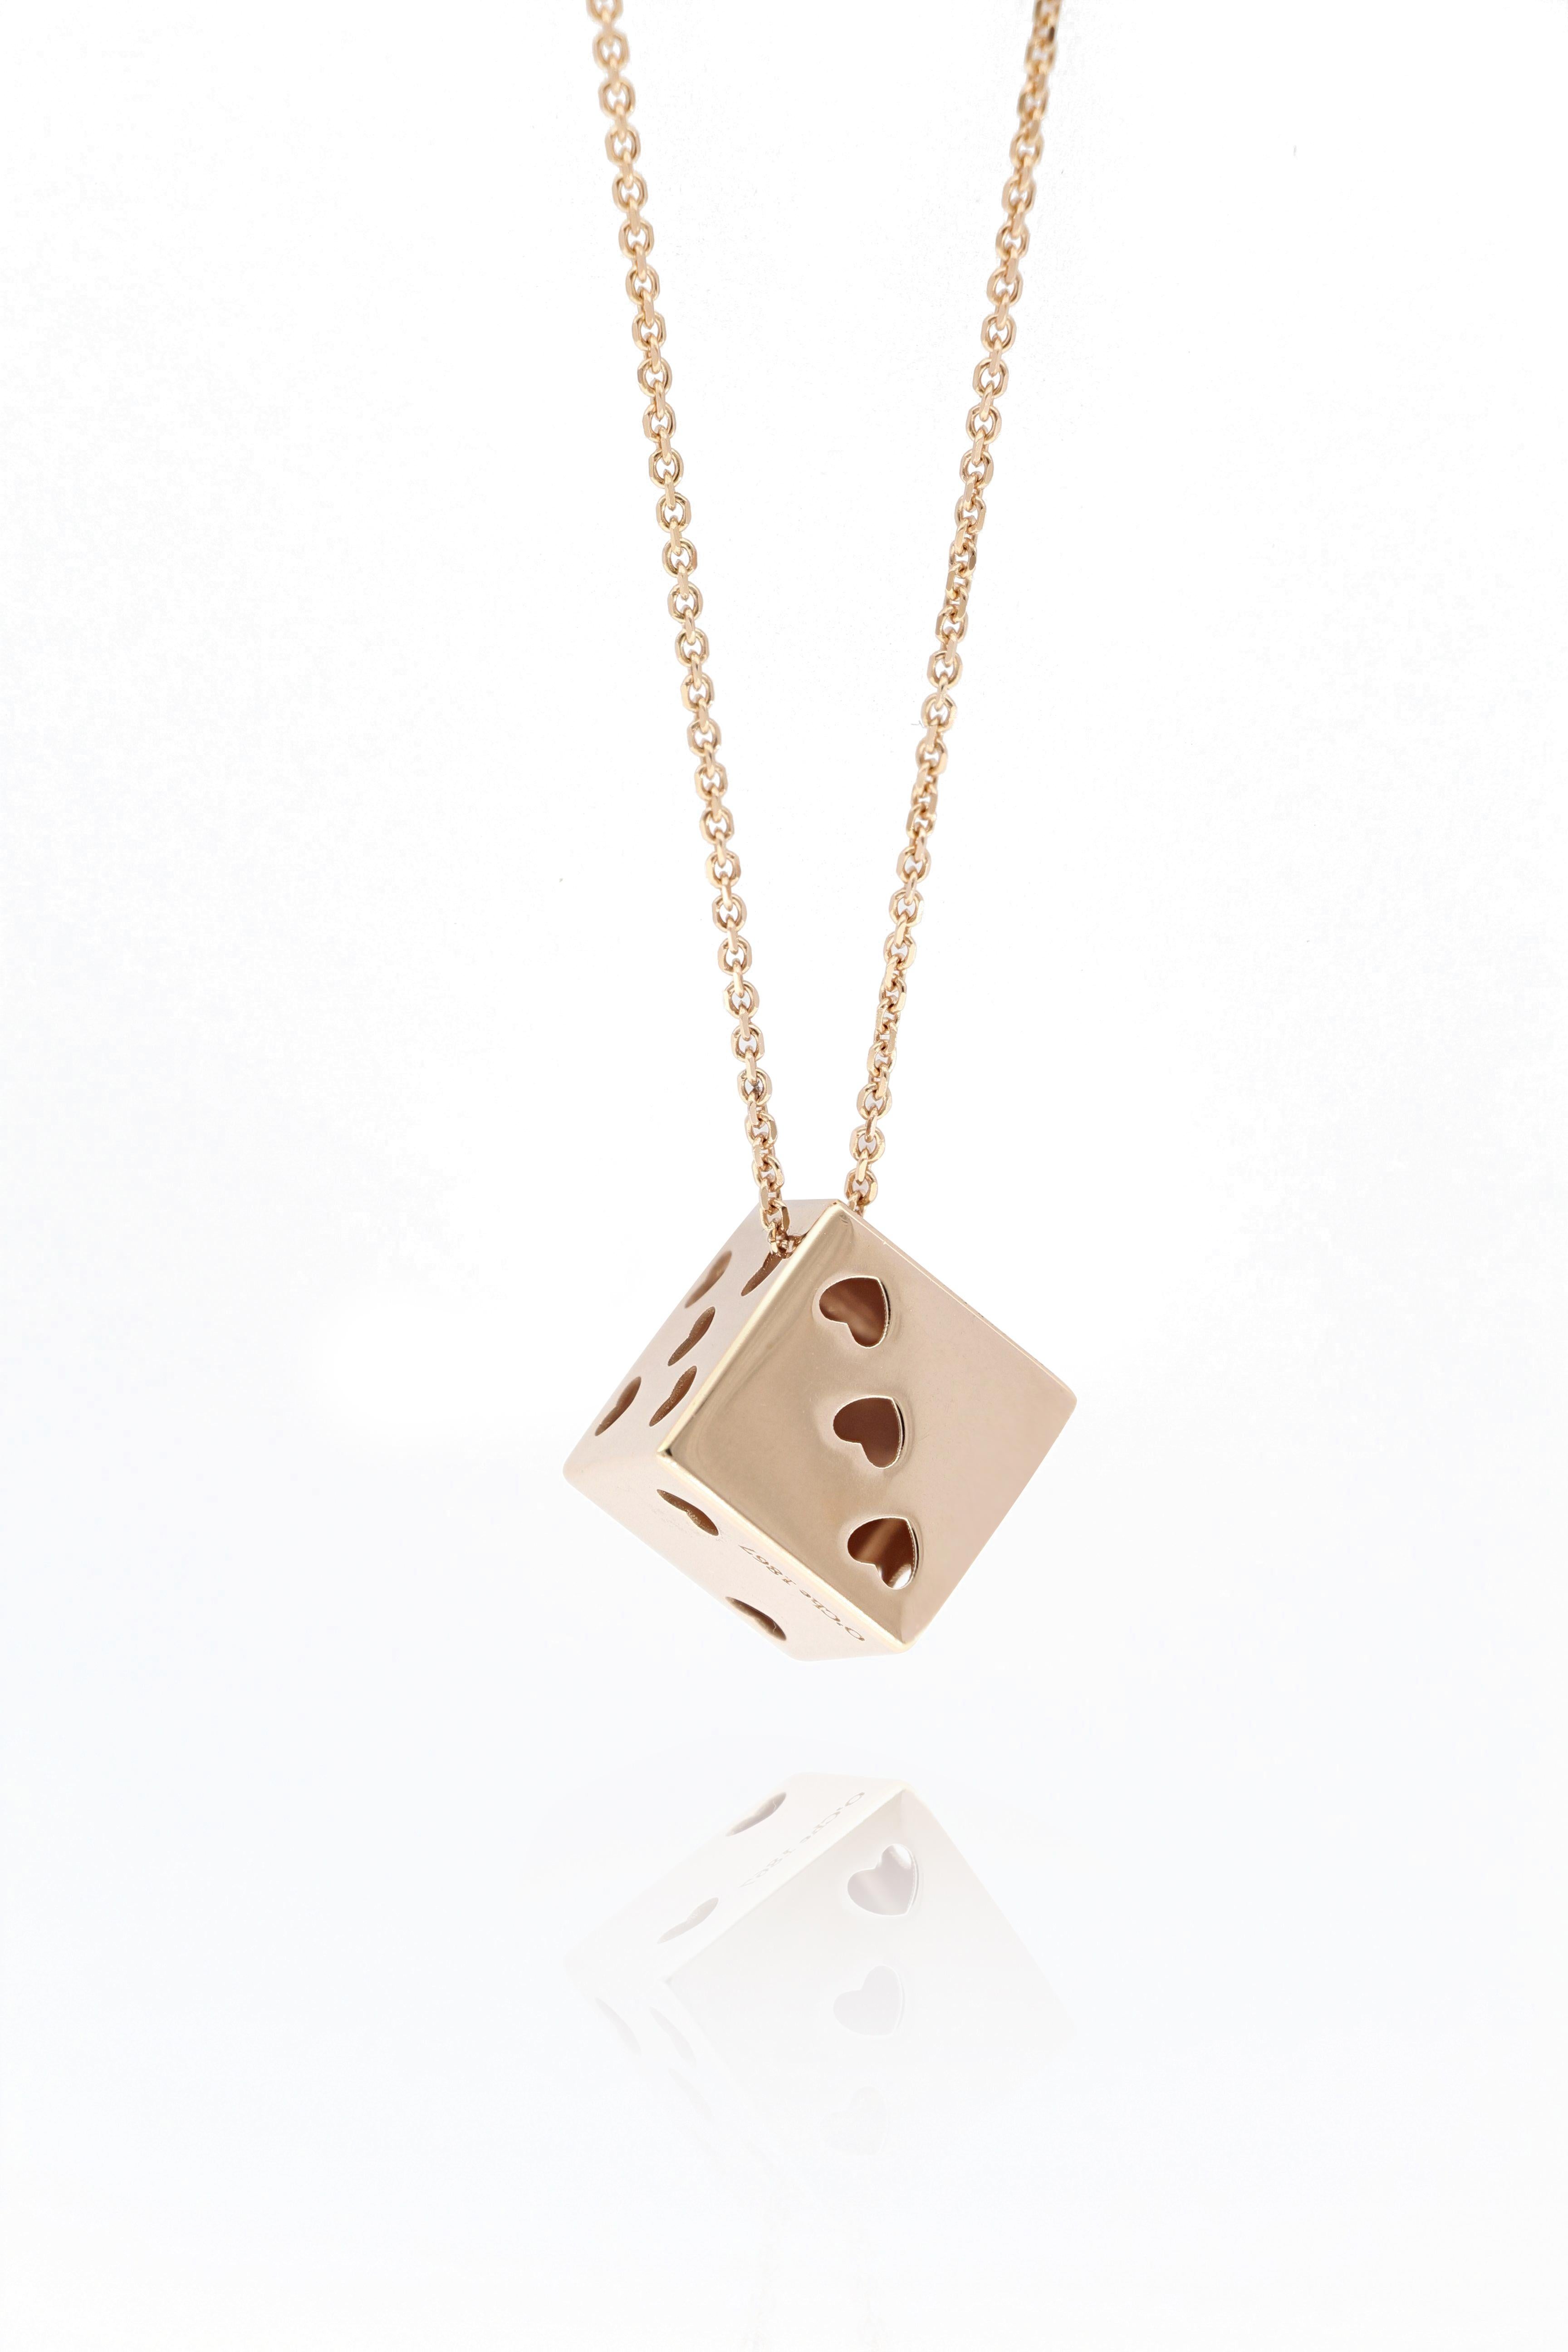 This unique 18K rose gold pendant necklace, designed and made in Italy,  is in the form of a dice cube. It is very trandy and stylish, can be matched with jeans and everyday wear.

The company was founded one and a half centuries ago in Macau. The